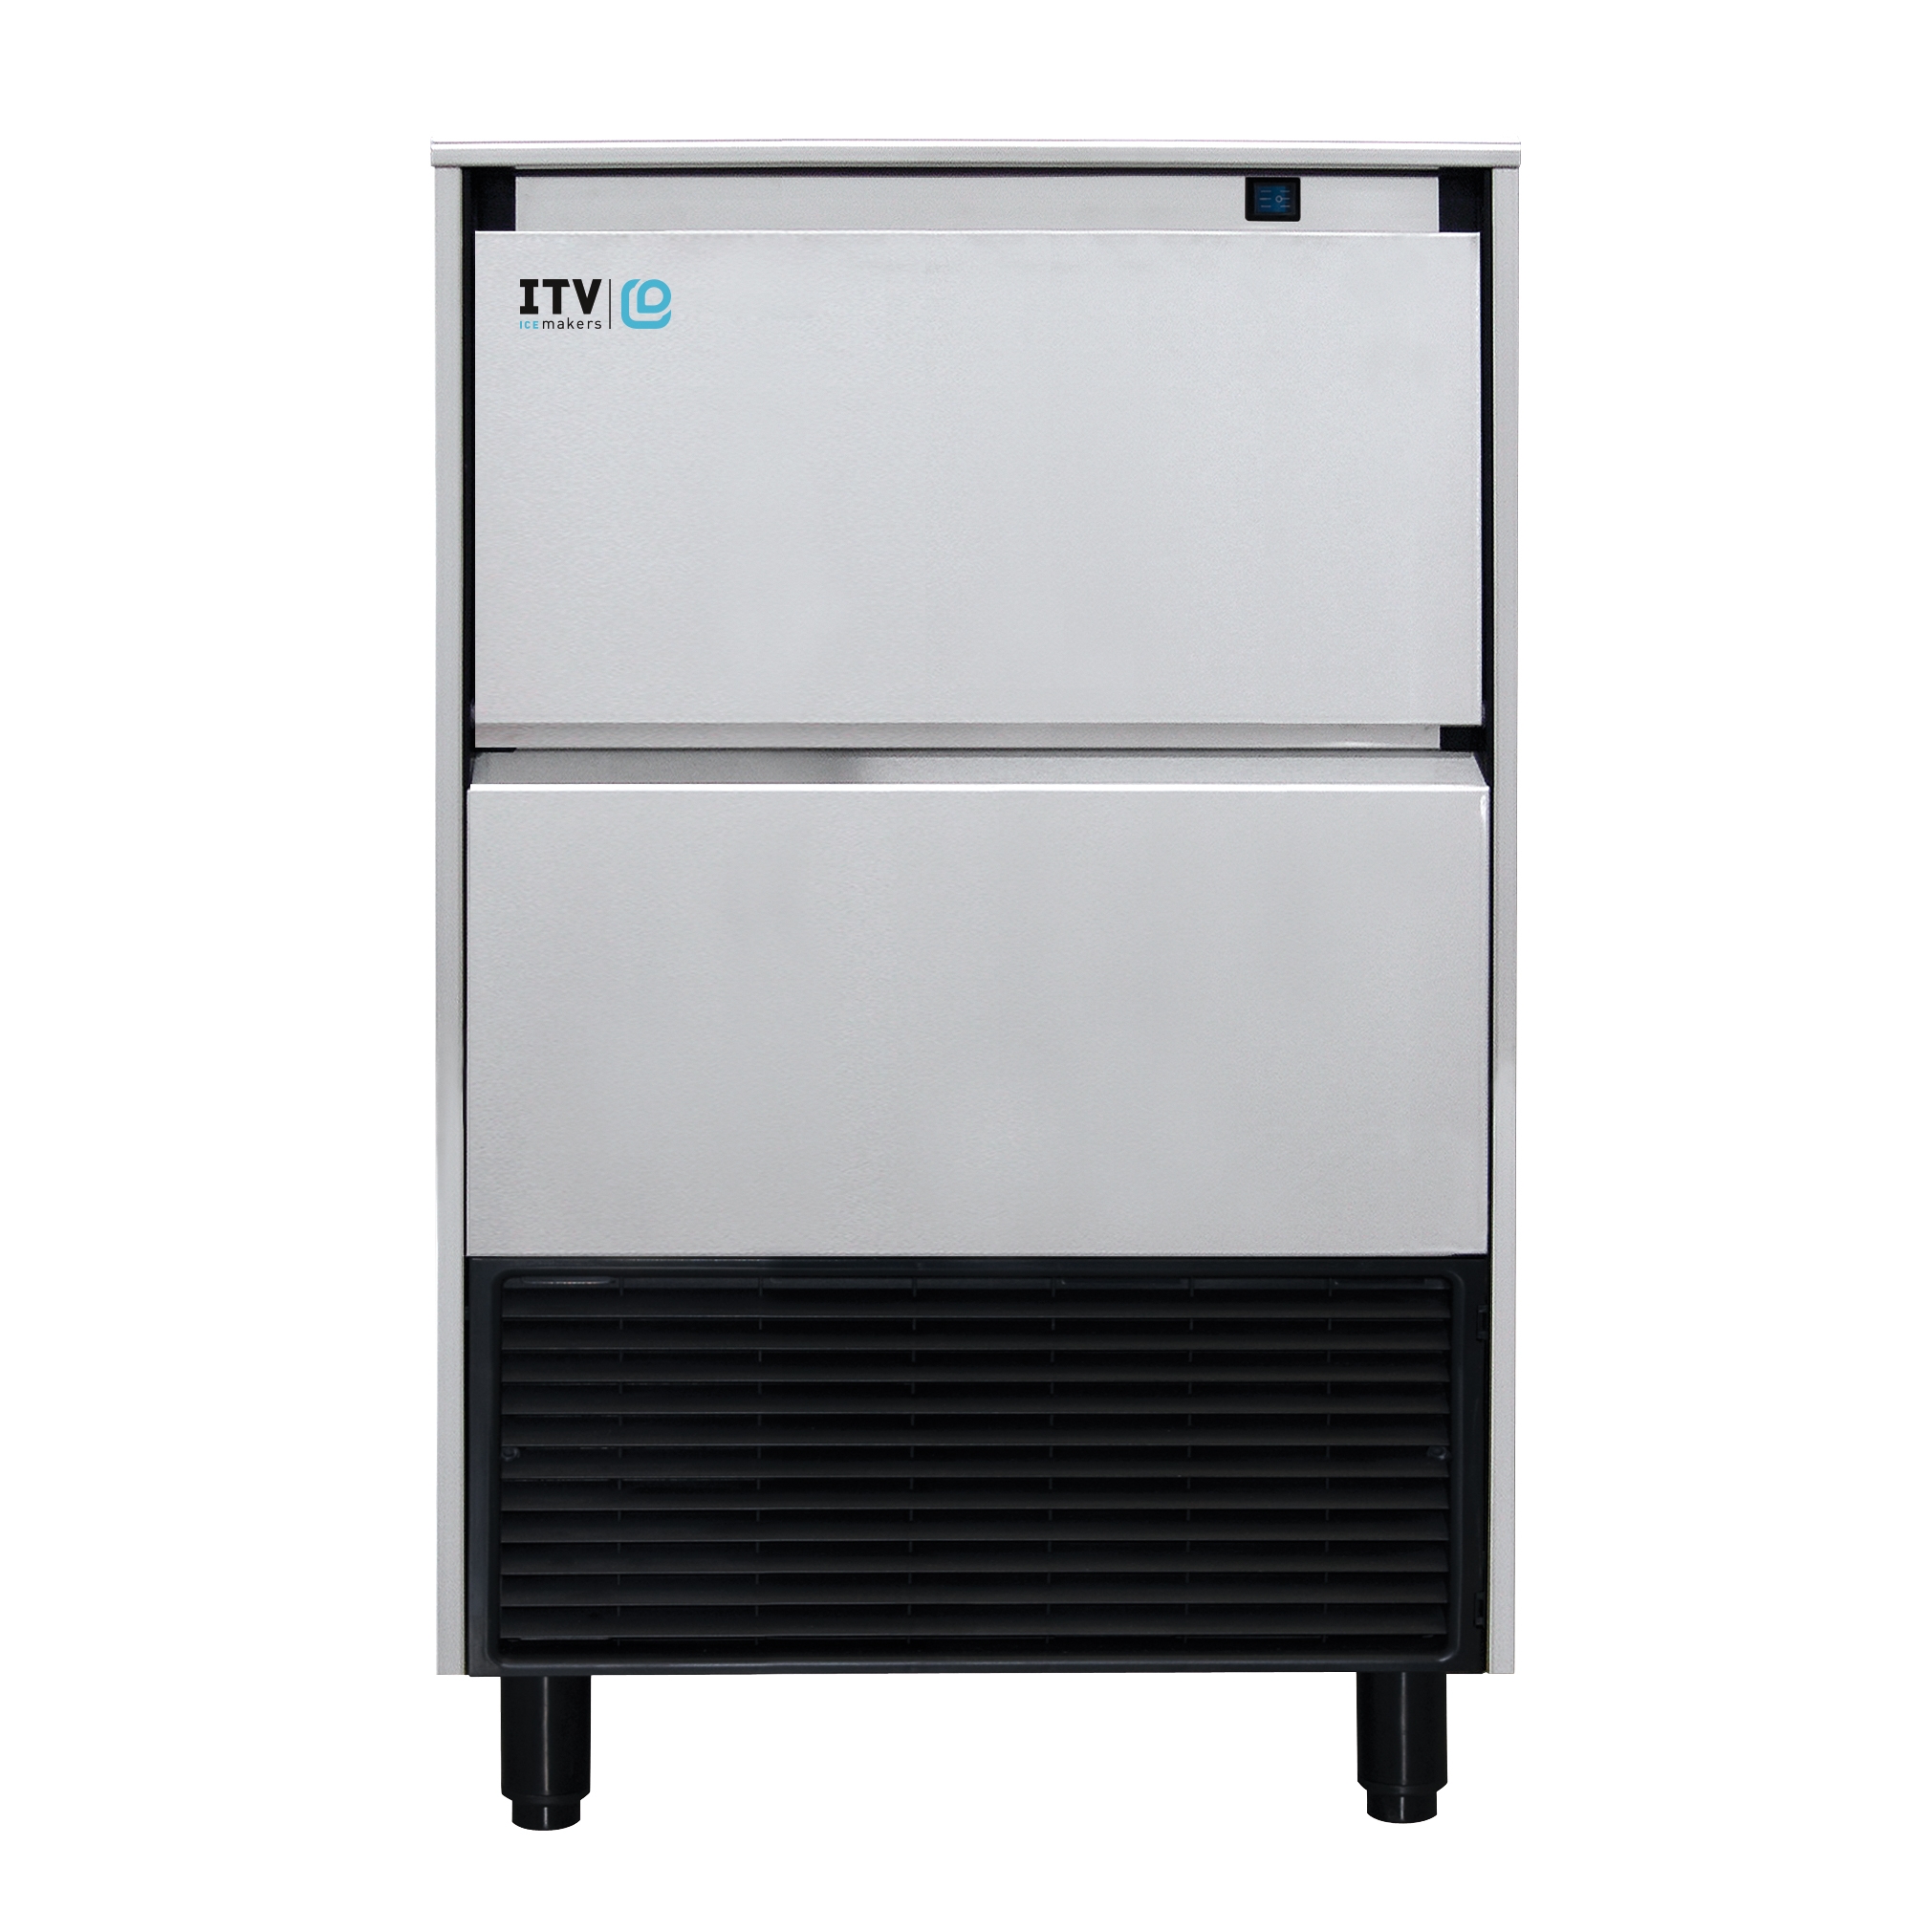 ITV ALFA NG 265 Ice Maker with Bin, 123 lbs, Dice Cubes, 270 lbs/Day